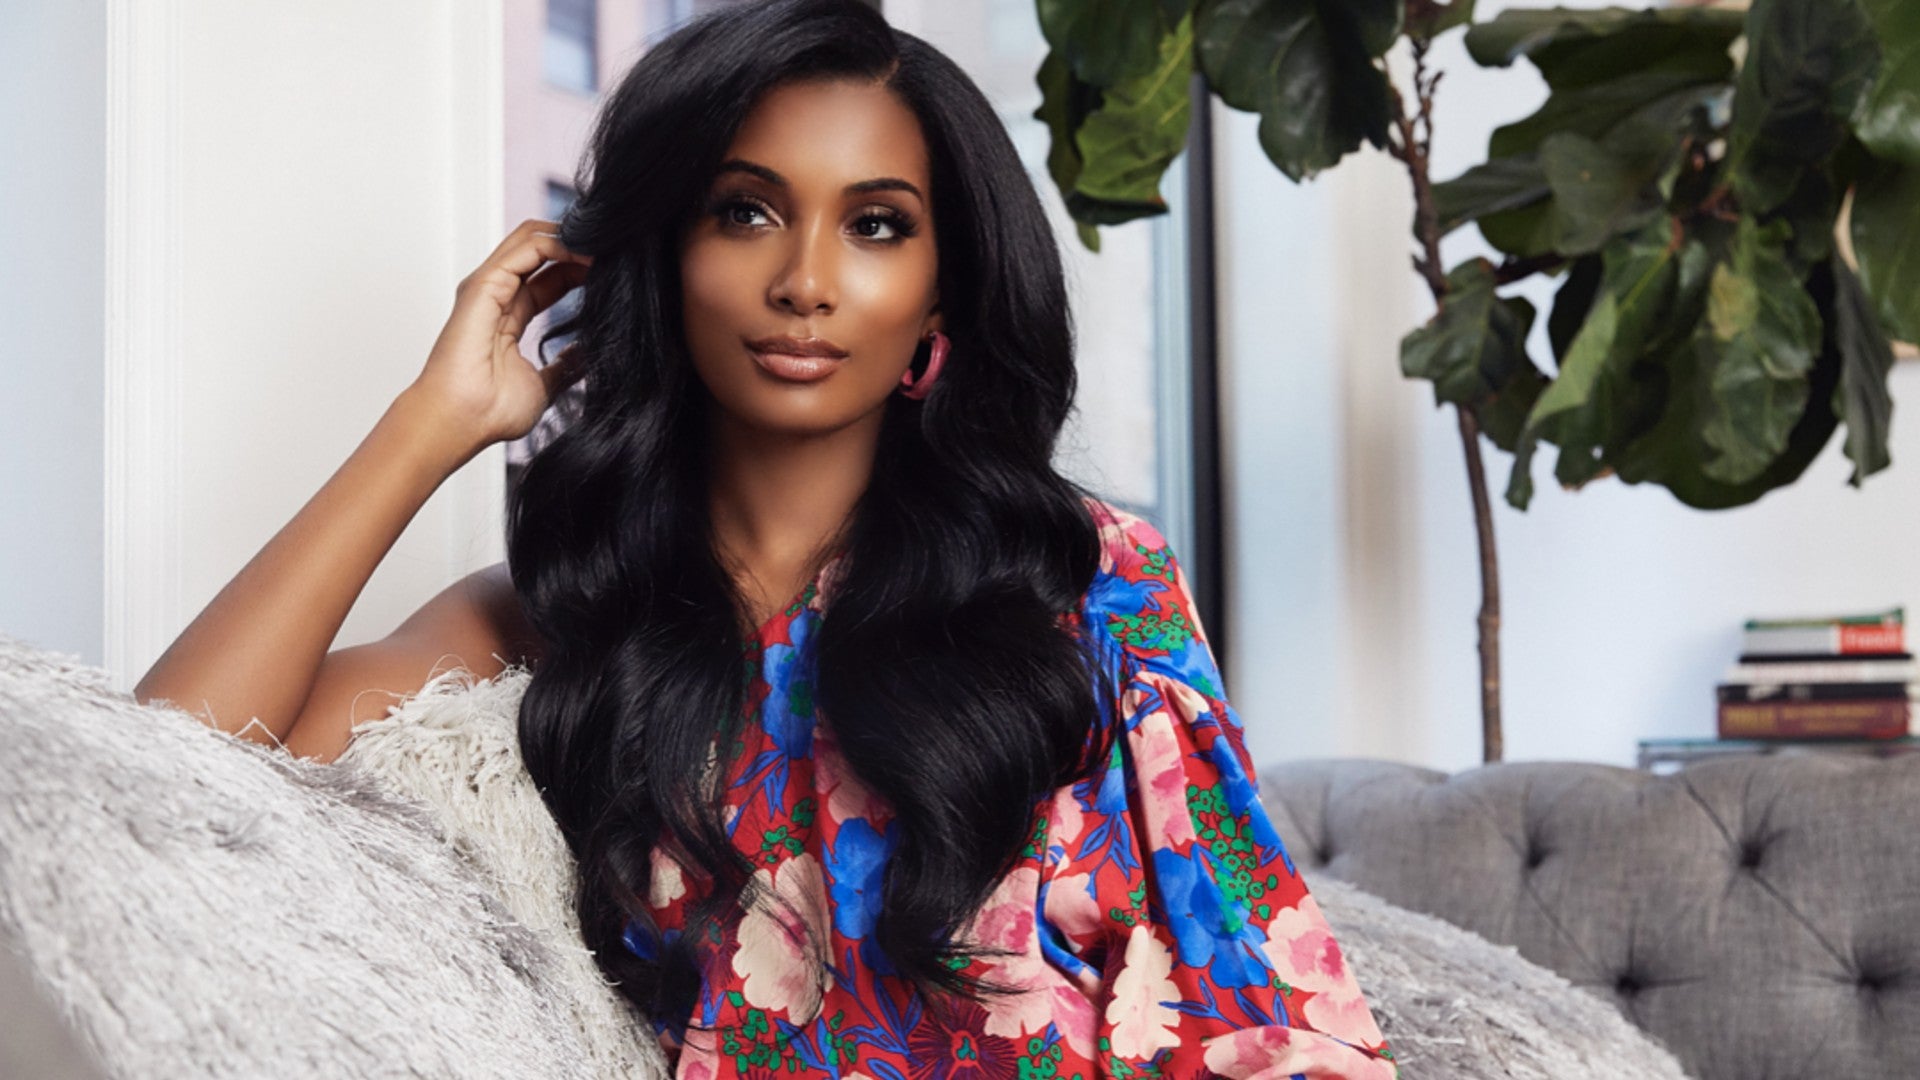 Why Does This Sew-In Cost $1,500 And Take 8 Hours To Install?